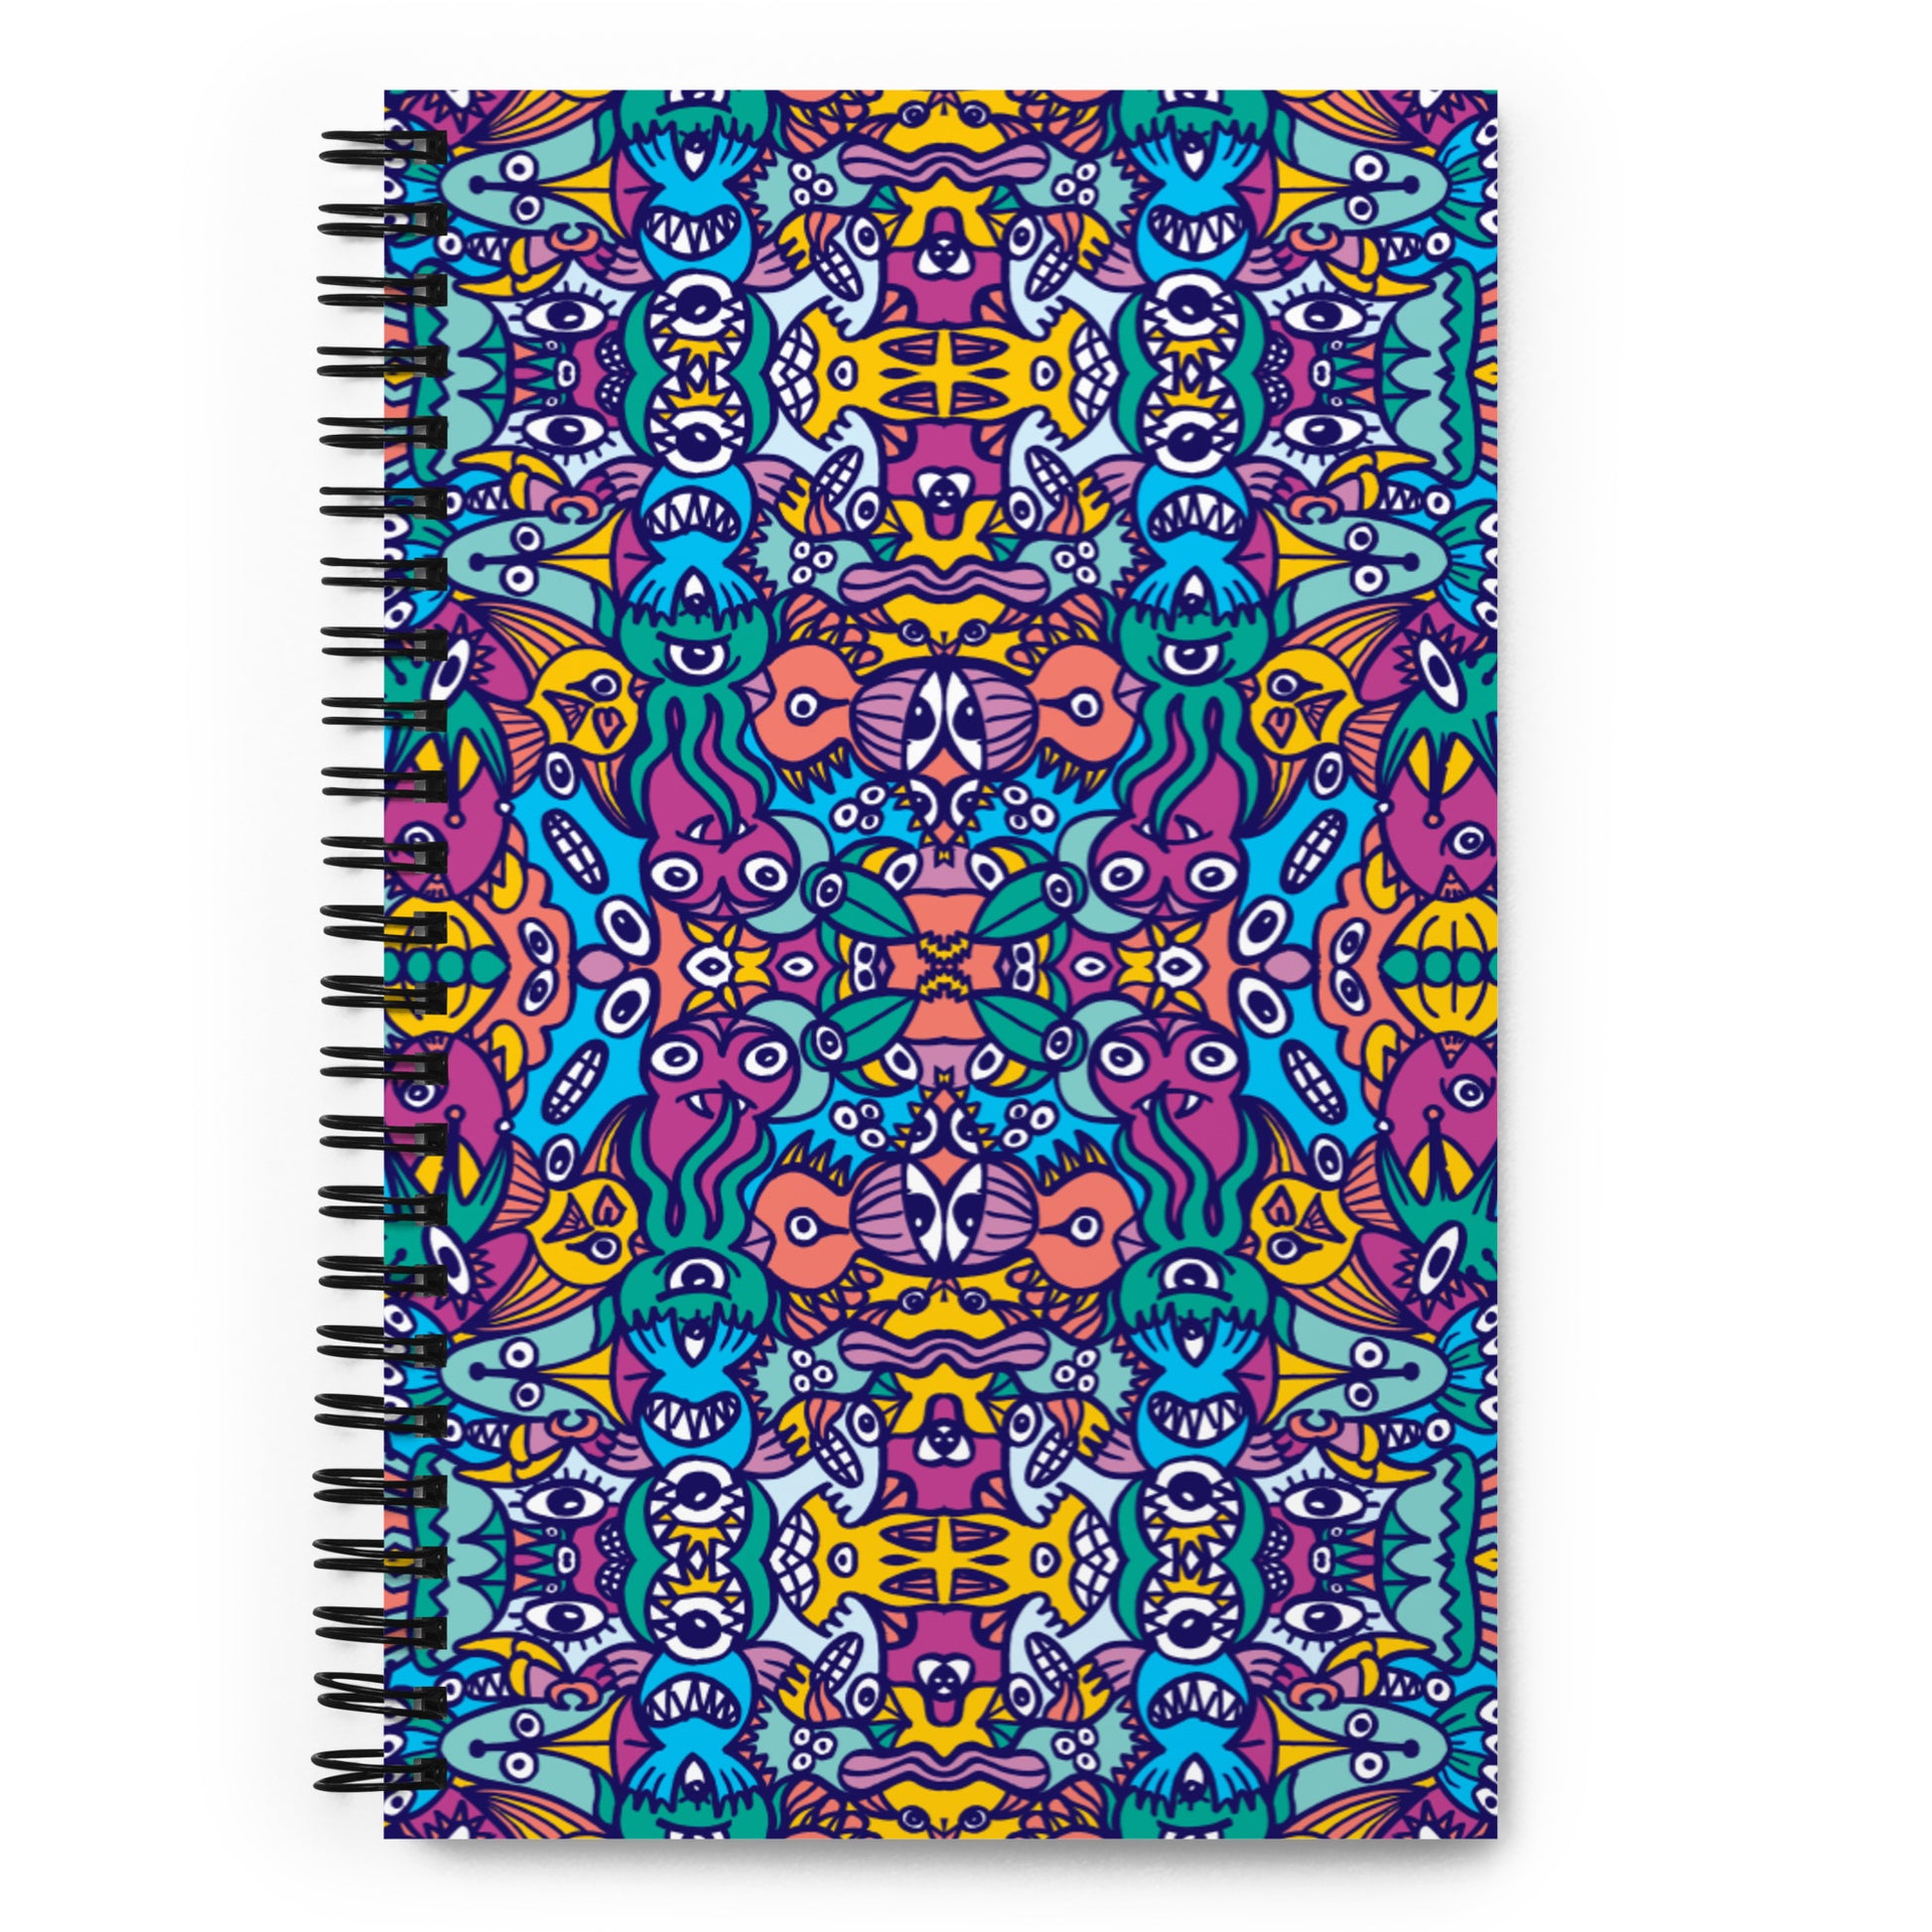 Whimsical design featuring multicolor critters from another world Spiral notebook. Front view